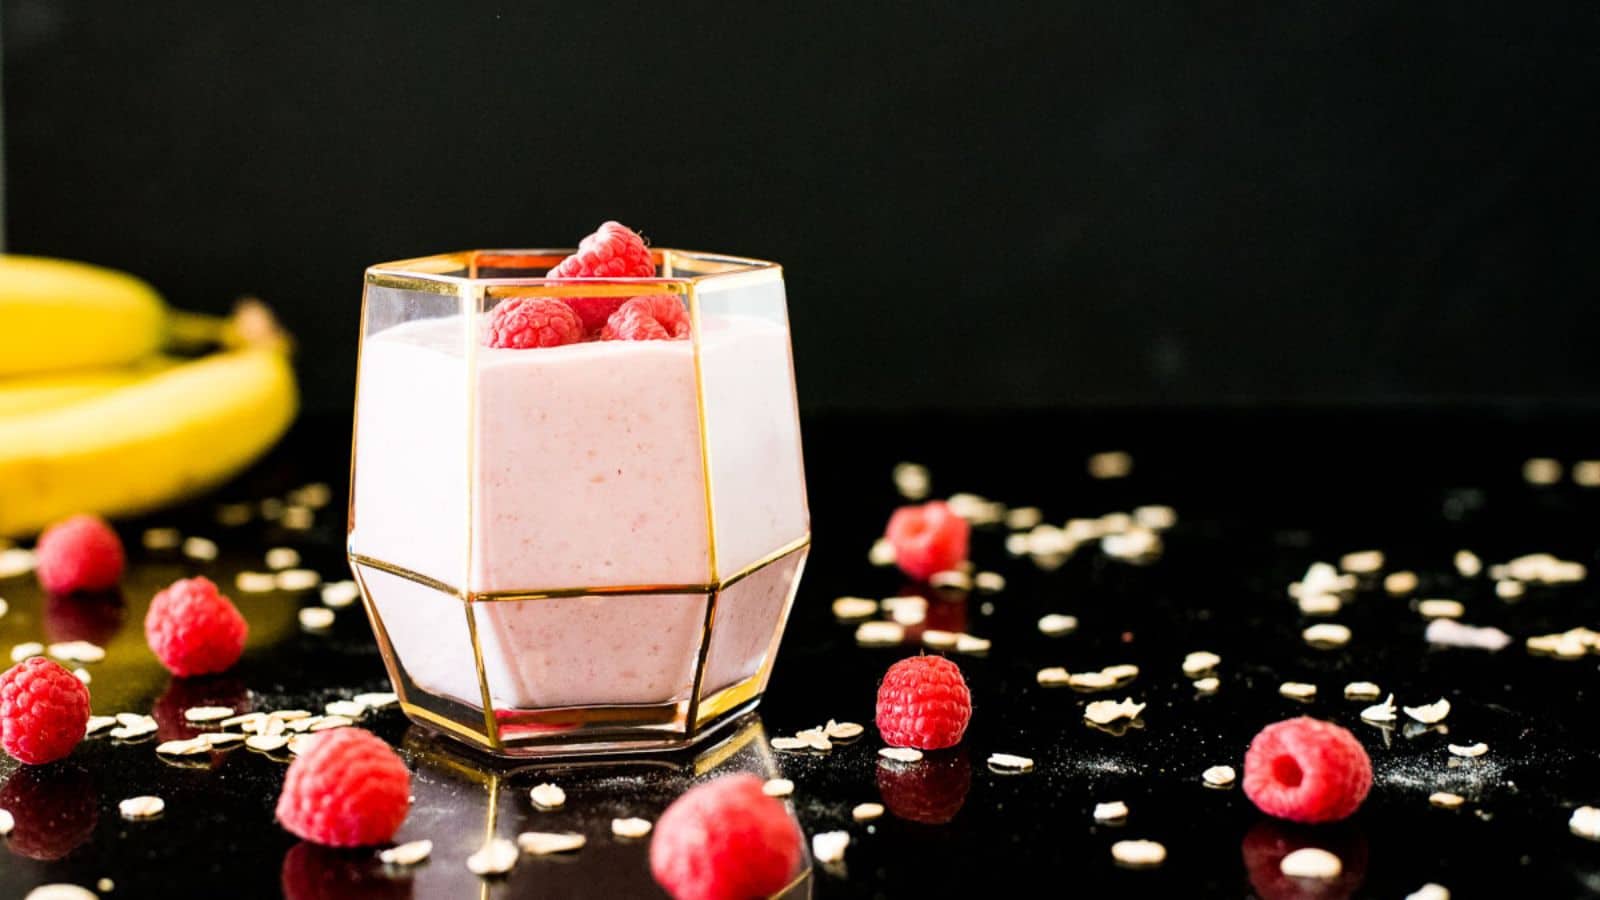 Raspberry smoothie with raspberries on top in gold-trimmed glass on a black surface.